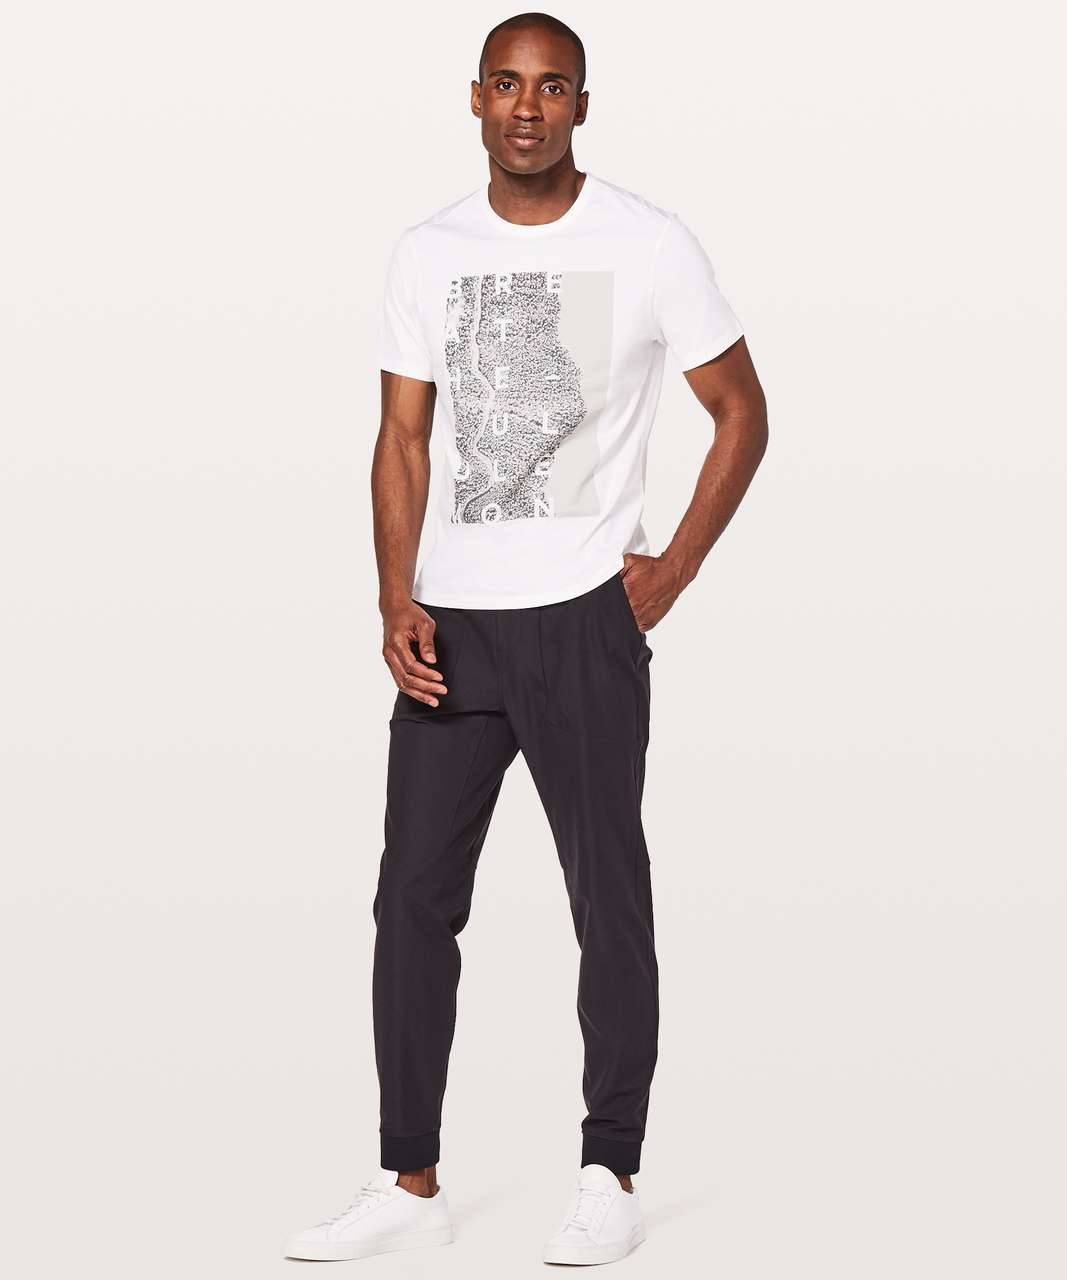 Lululemon View From The Tree Tops Tee - White